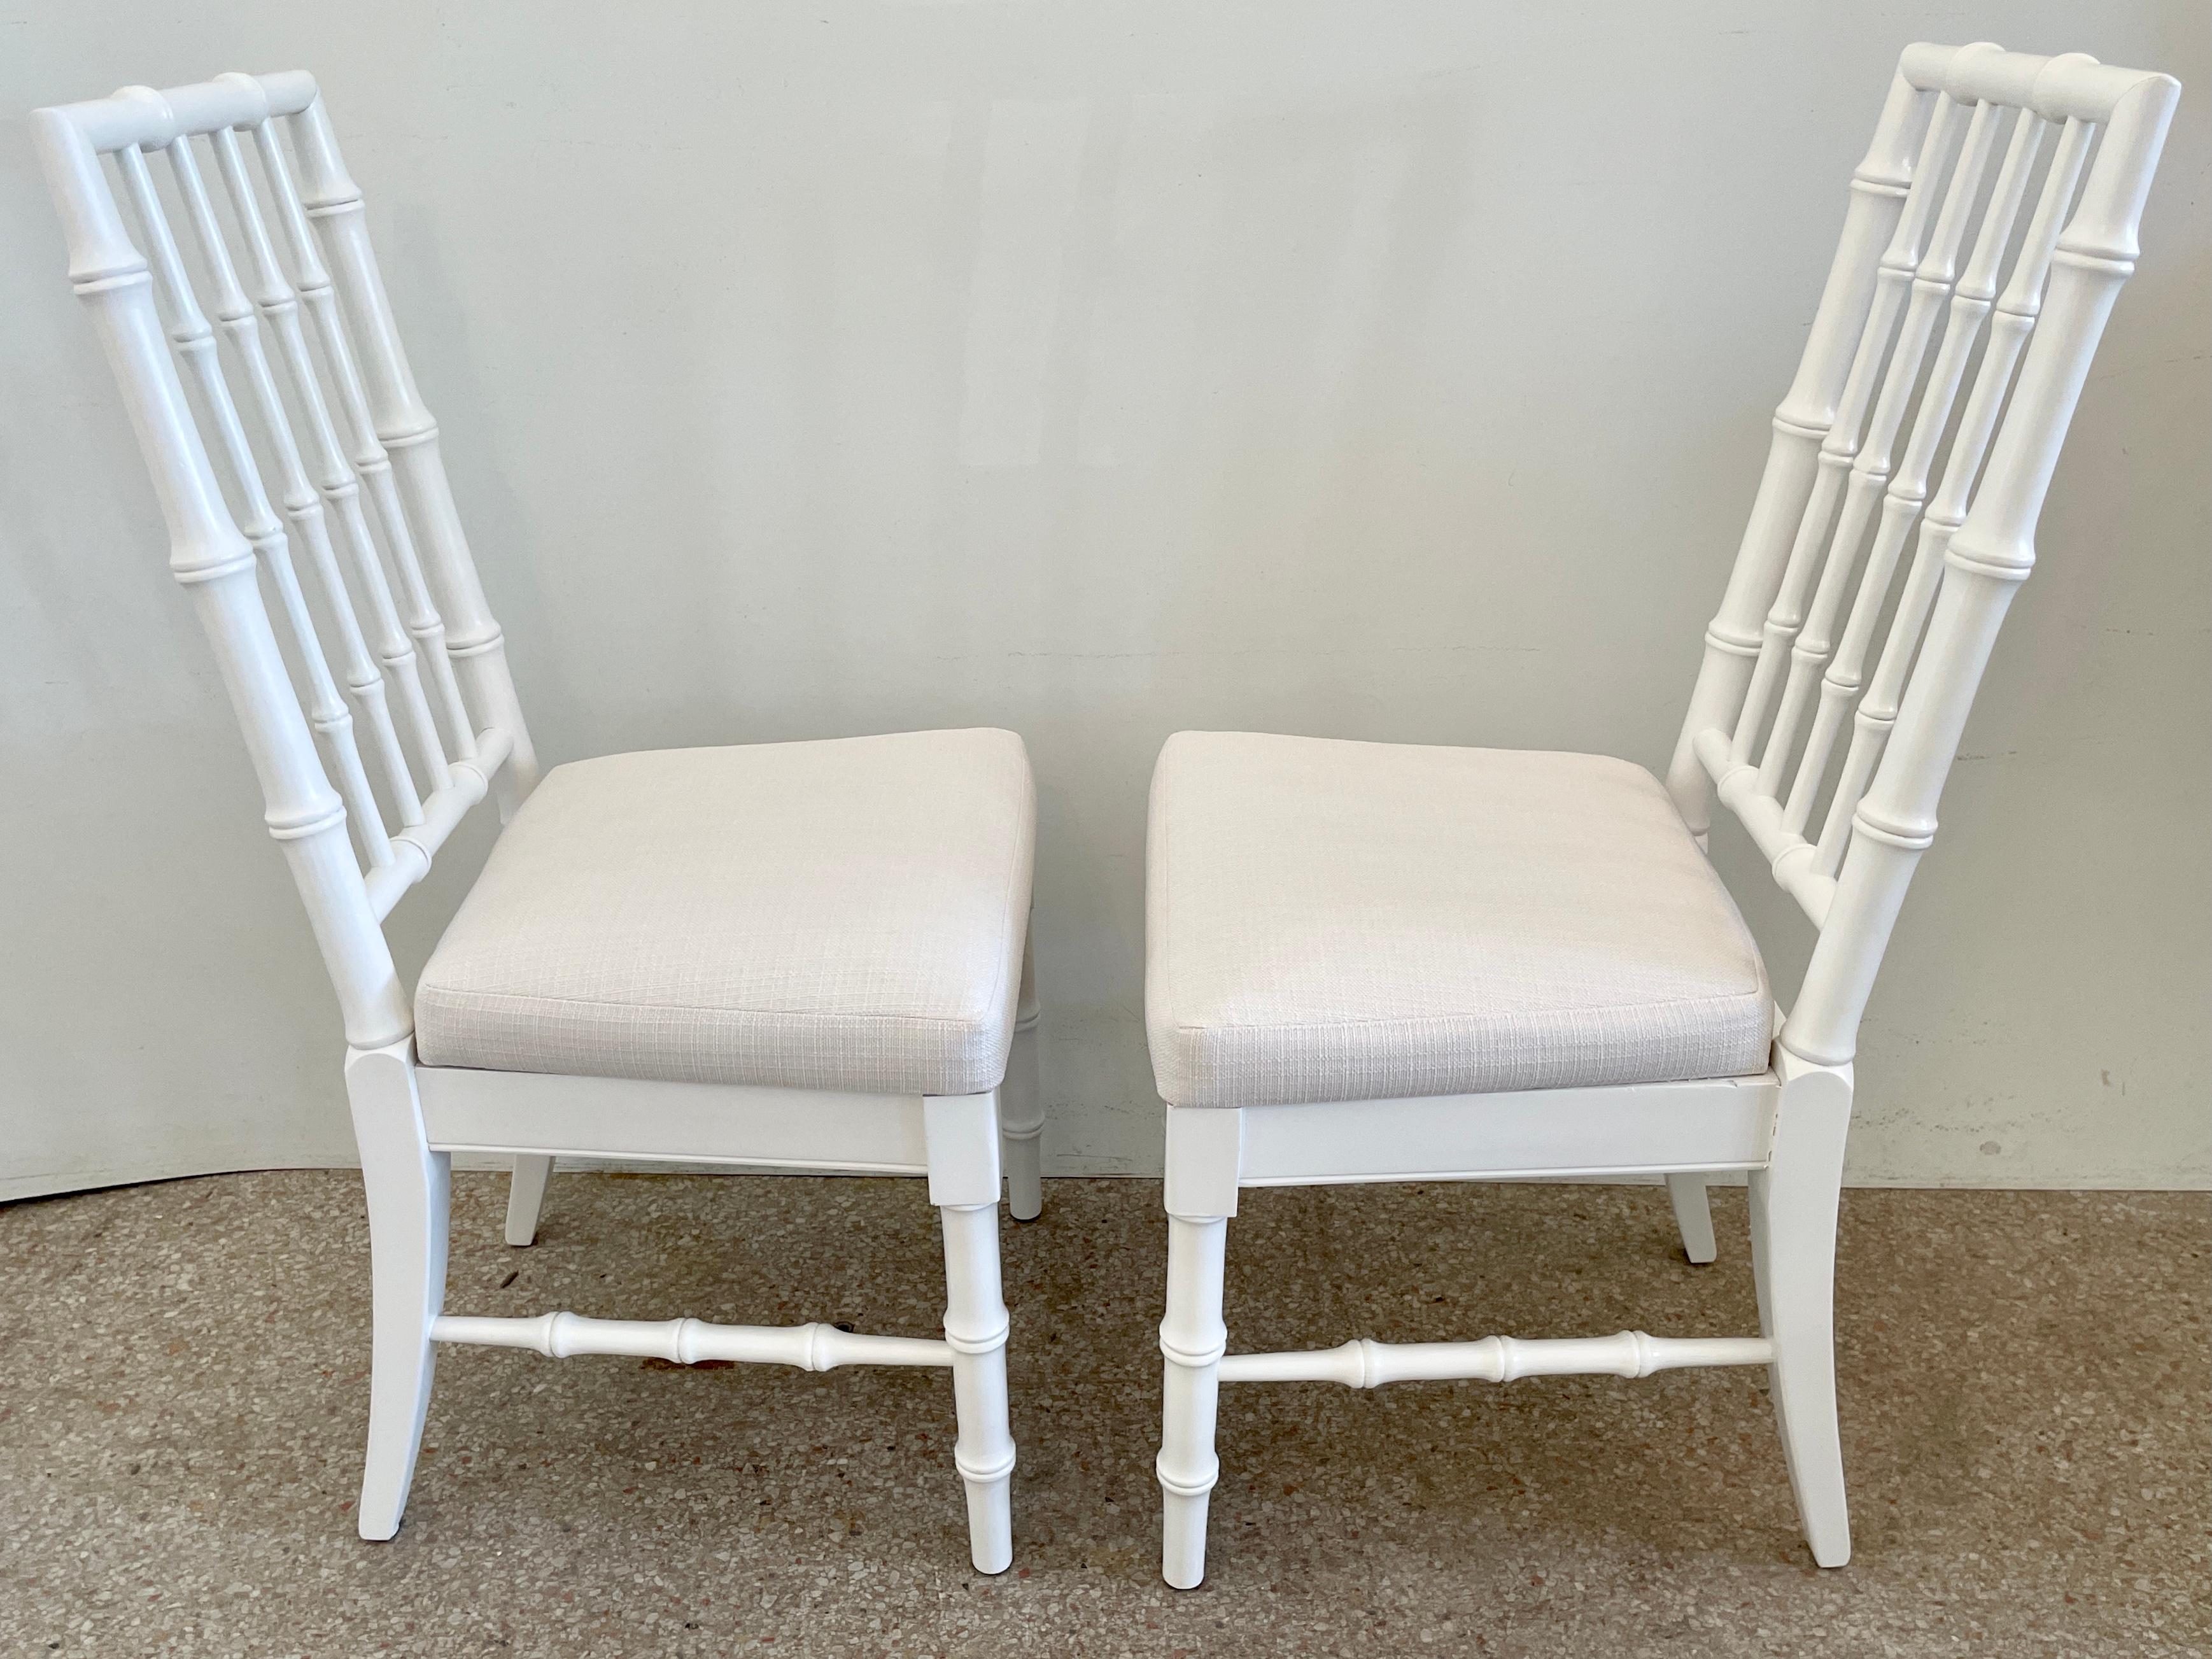 Faux Bamboo Dining Chairs in White Lacquer and Todd Hase Textiles, Set of 4 For Sale 2